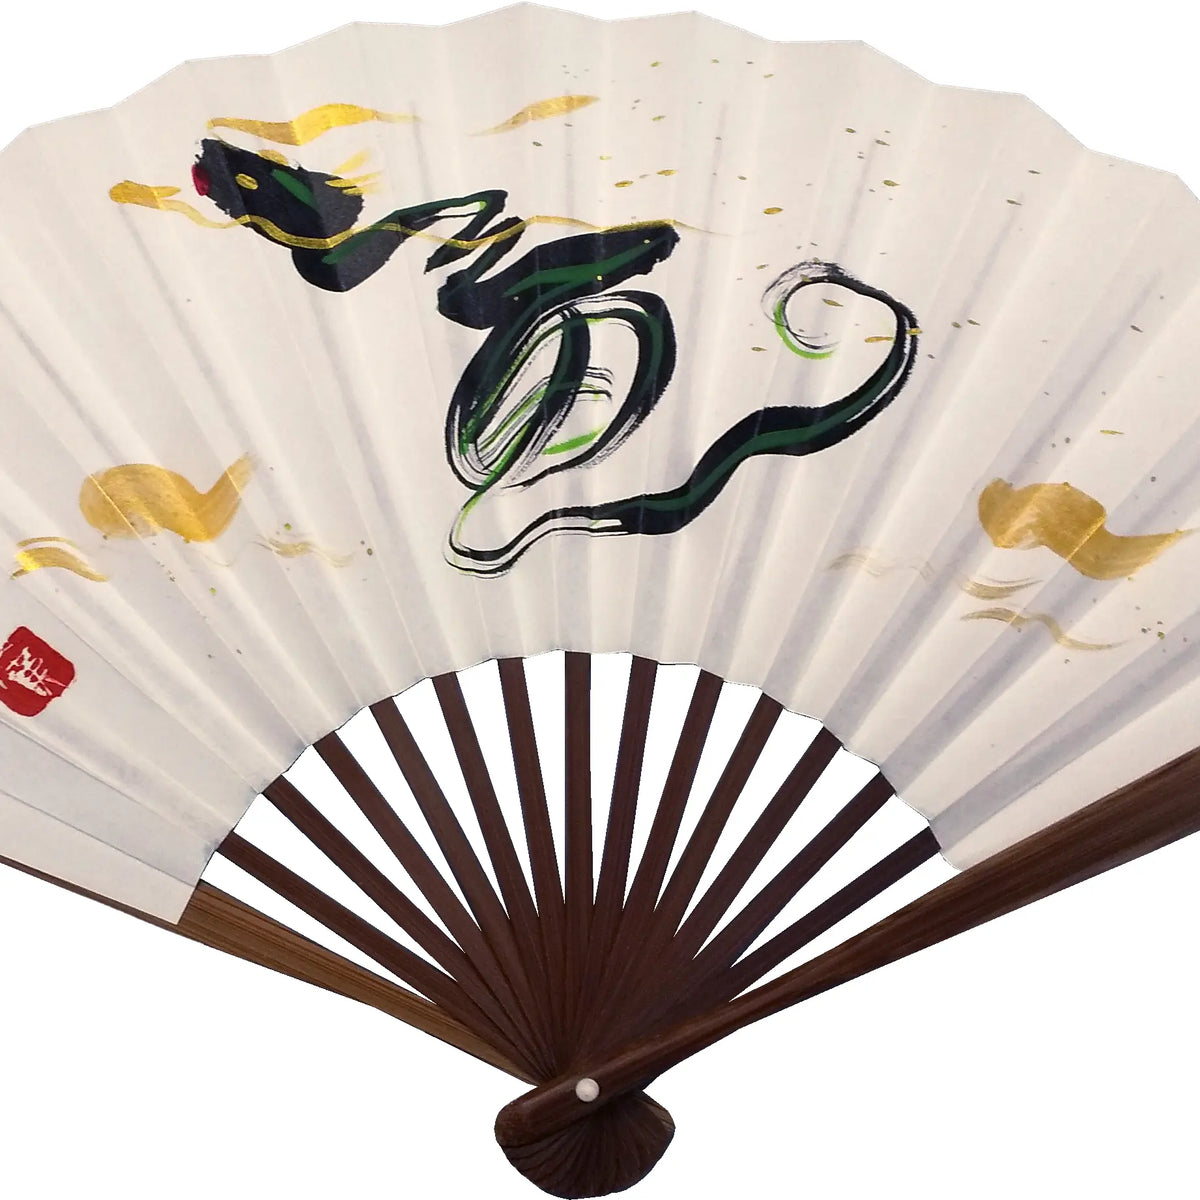 Deadline extended until November 19: Limited to 30 Hirosharu Masunaga zodiac hand-painted fans "made-to-order".